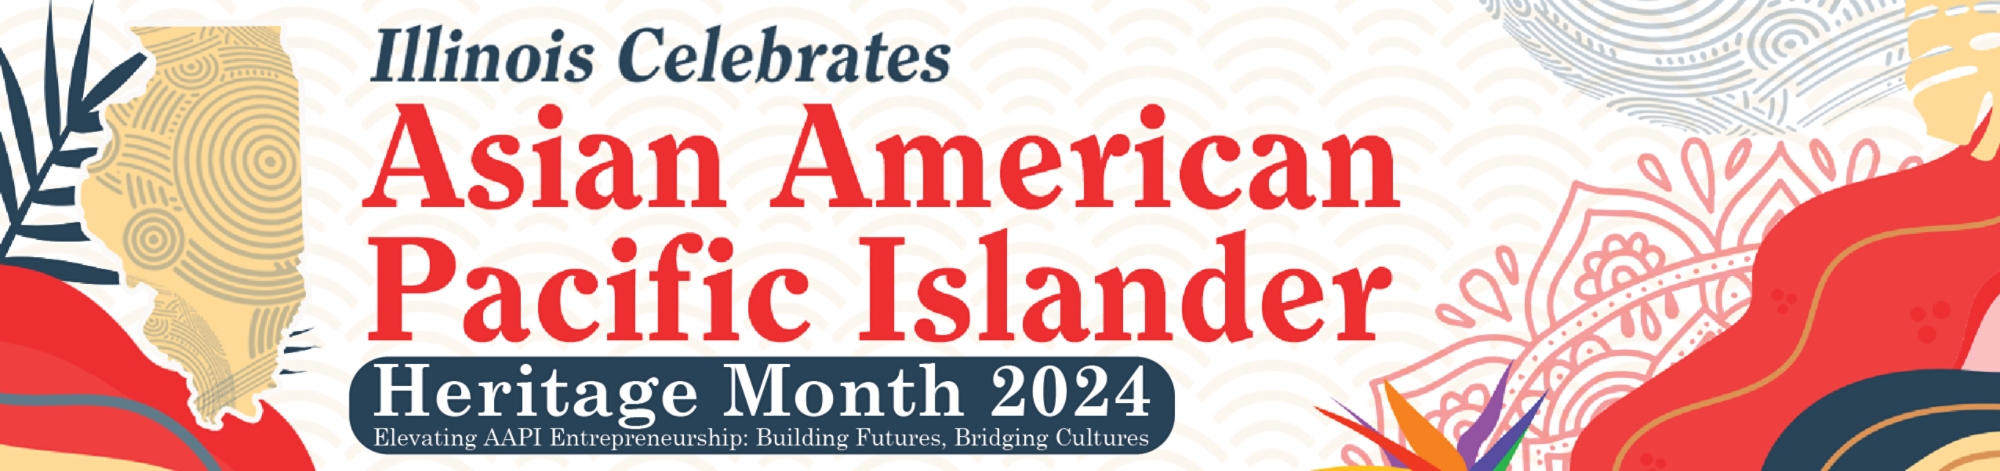 Asian American Pacific Islander month 2024 banner